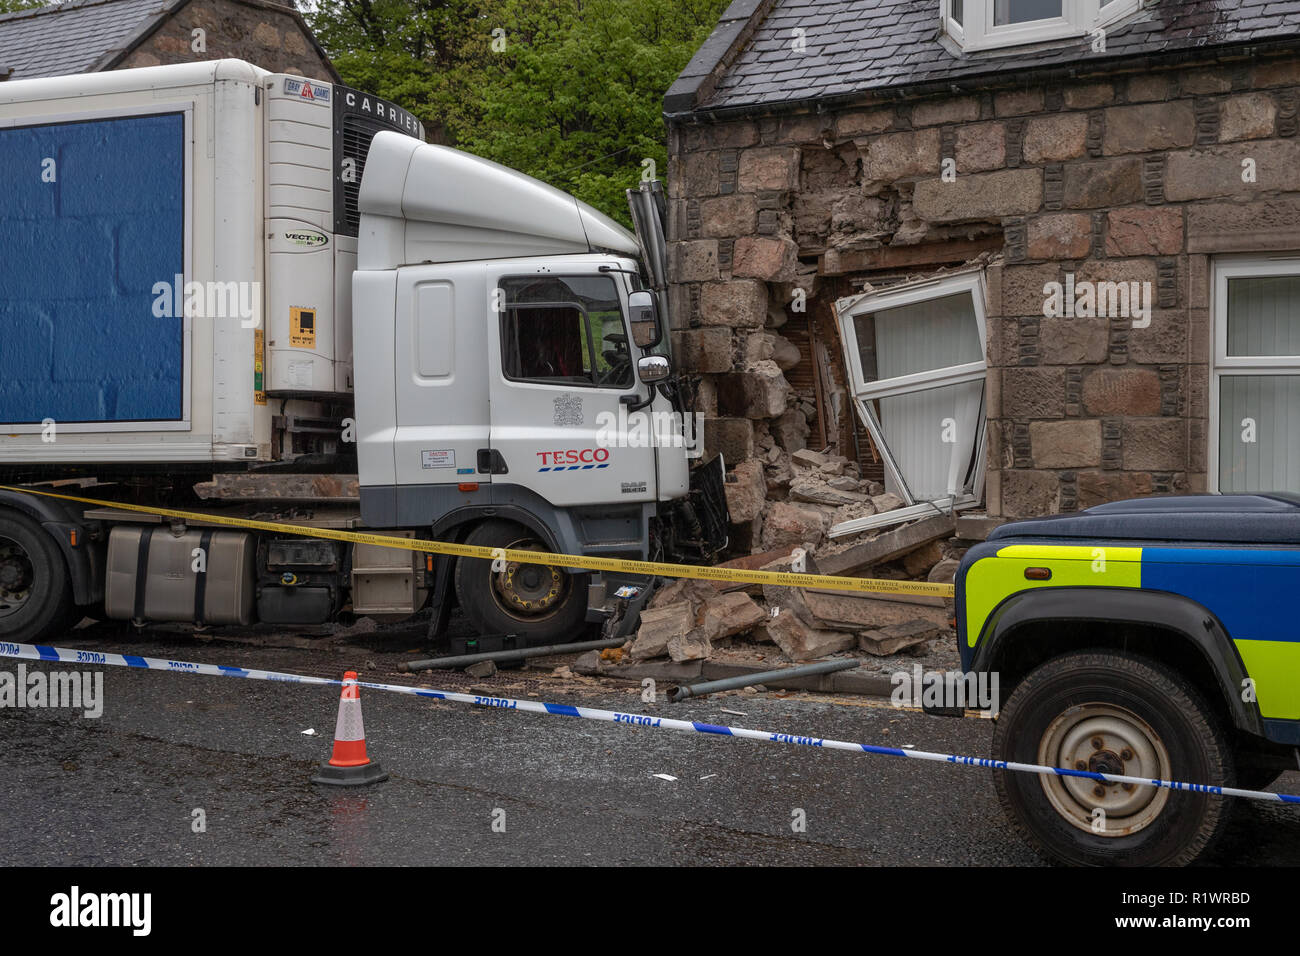 ROTHES, MORAY, SCOTLAND 13 MAY 2018:- This is the scene of the accident where a Tesco Delivery truck collided into a house on the main street. Stock Photo